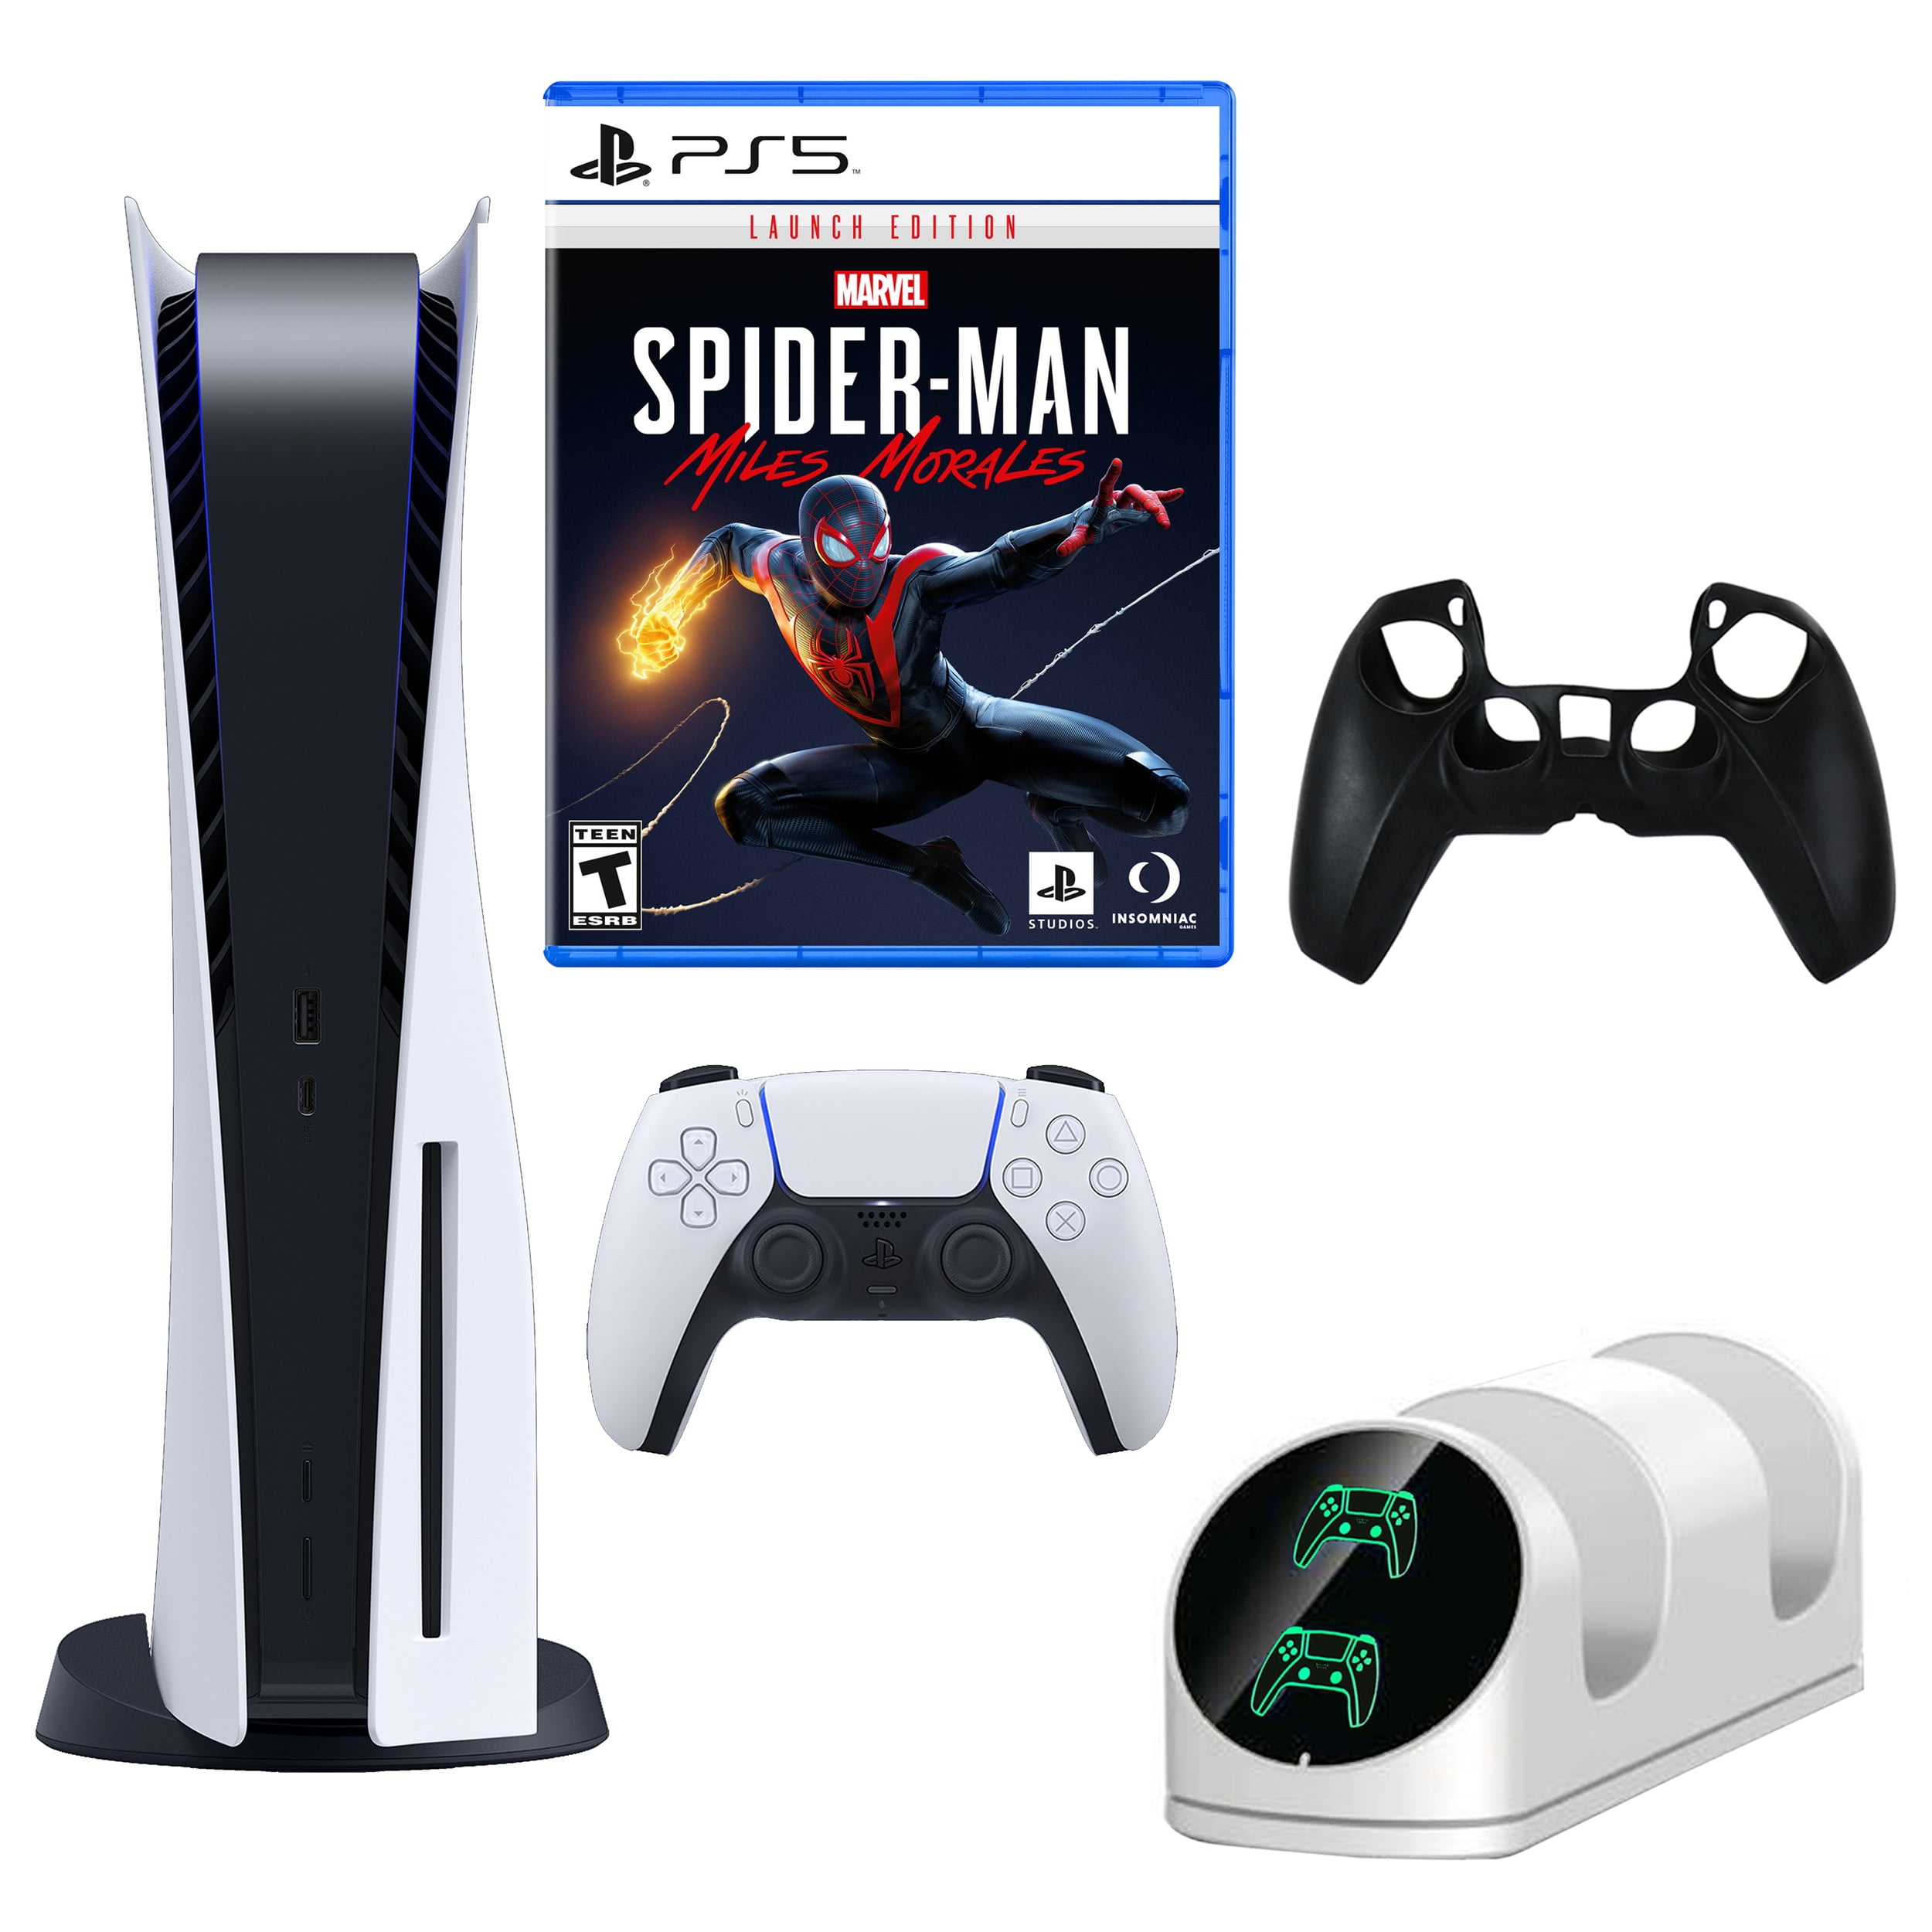 TEC Sony PlayStation_PS5 Gaming Console(Disc Version) with Spiderman Miles  Morales Game Bundle, PlayStation - 5